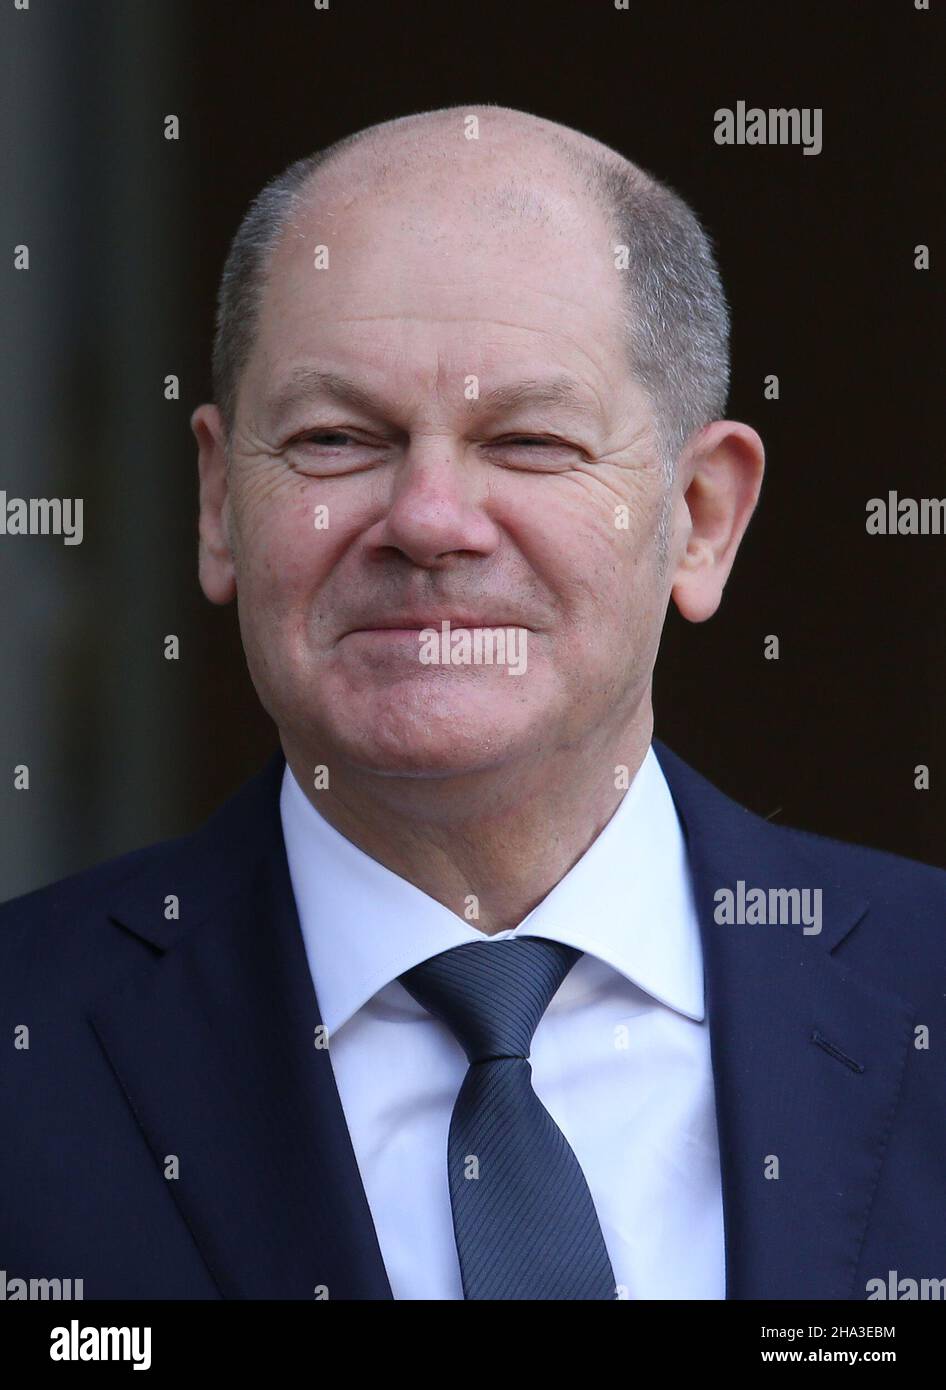 Paris, France. 10th Dec, 2021. German Chancellor Olaf Scholz arrives at the Elysee Palace to meet with French President Emmanuel Macron in Paris on Friday, December 10, 2021. The visit to Paris comes just few days after Scholz officially took over the role from his predecessor Angela Merkel. The two leaders are expected to discuss the Franco-German relations as well as France's upcoming EU presidency. Photo by David Silpa/UPI Credit: UPI/Alamy Live News Stock Photo